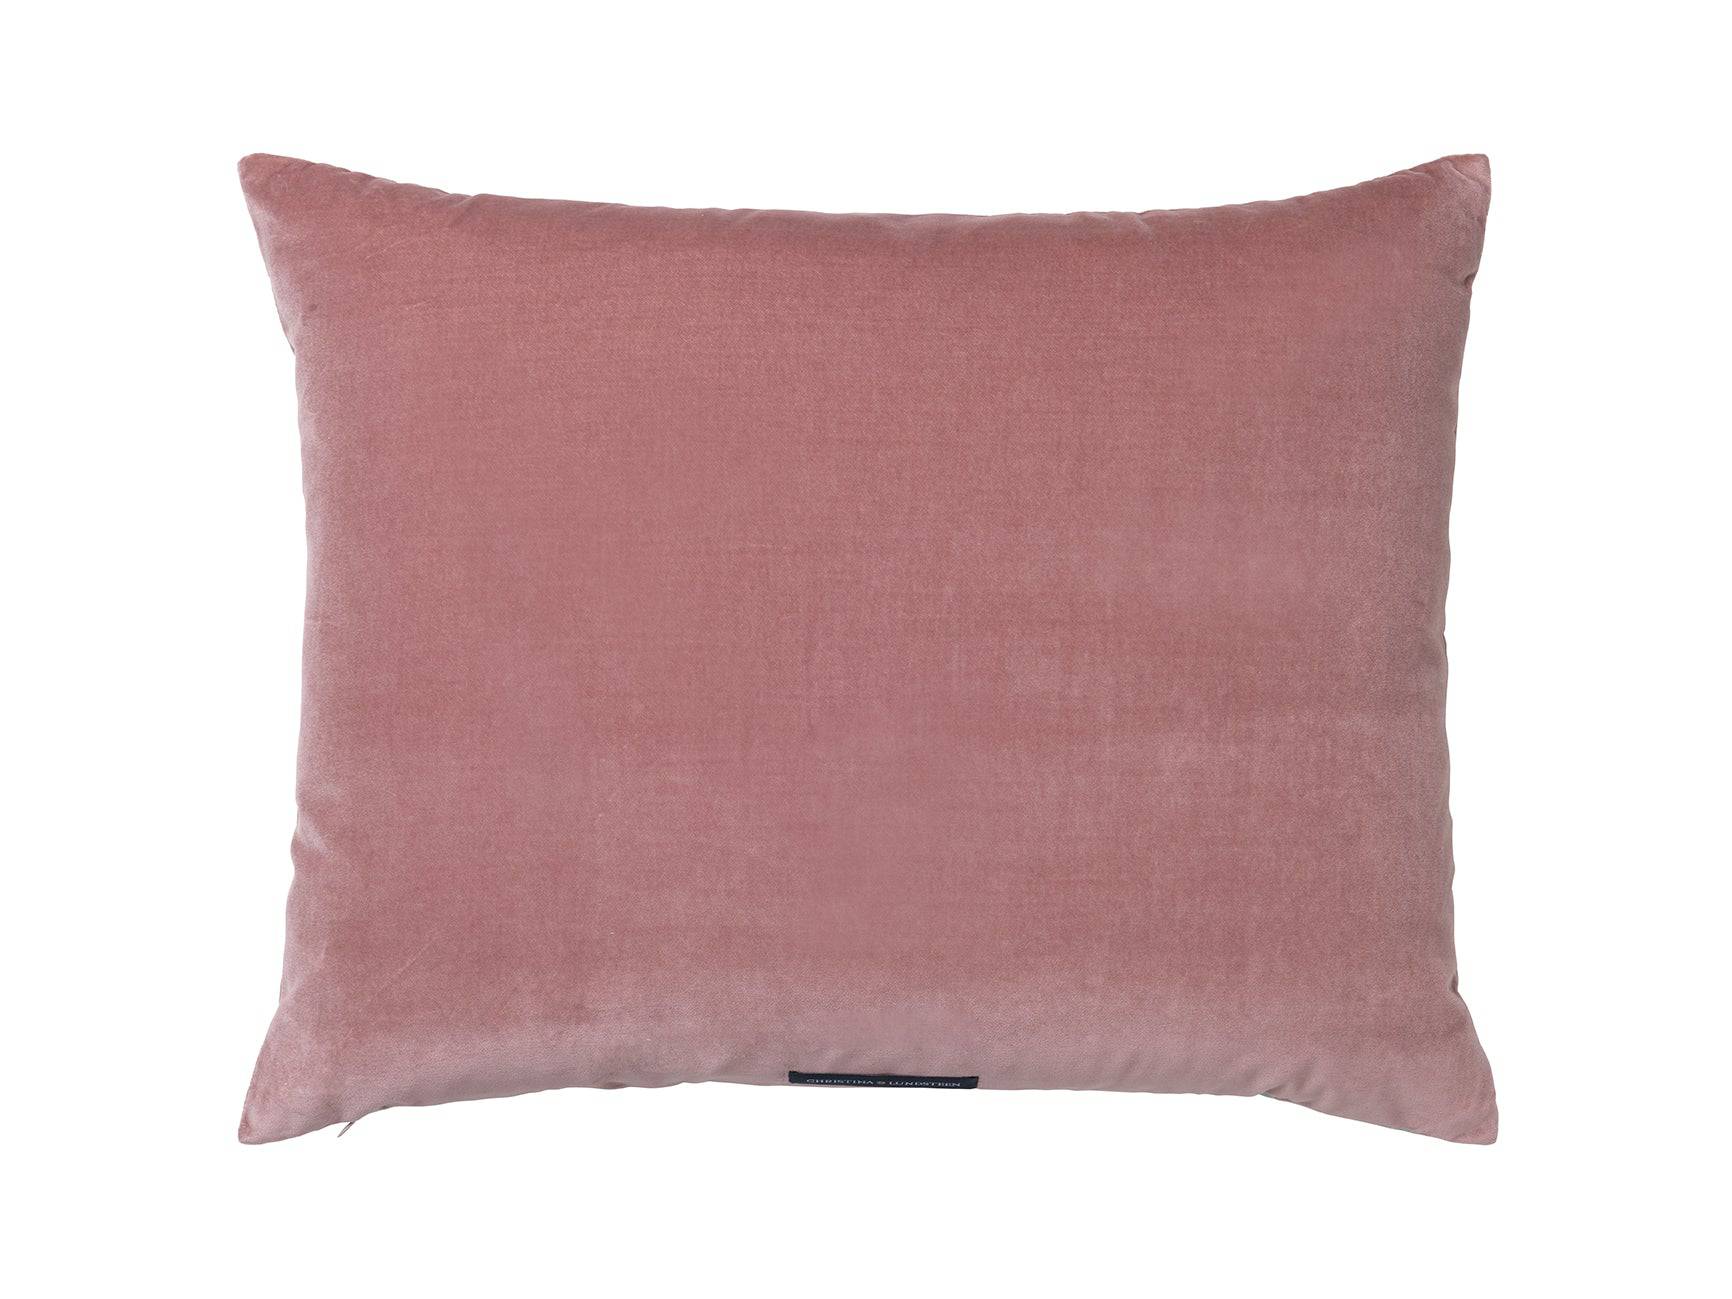 Millie Cushion - Old Rose & Blue Dust - THAT COOL LIVING